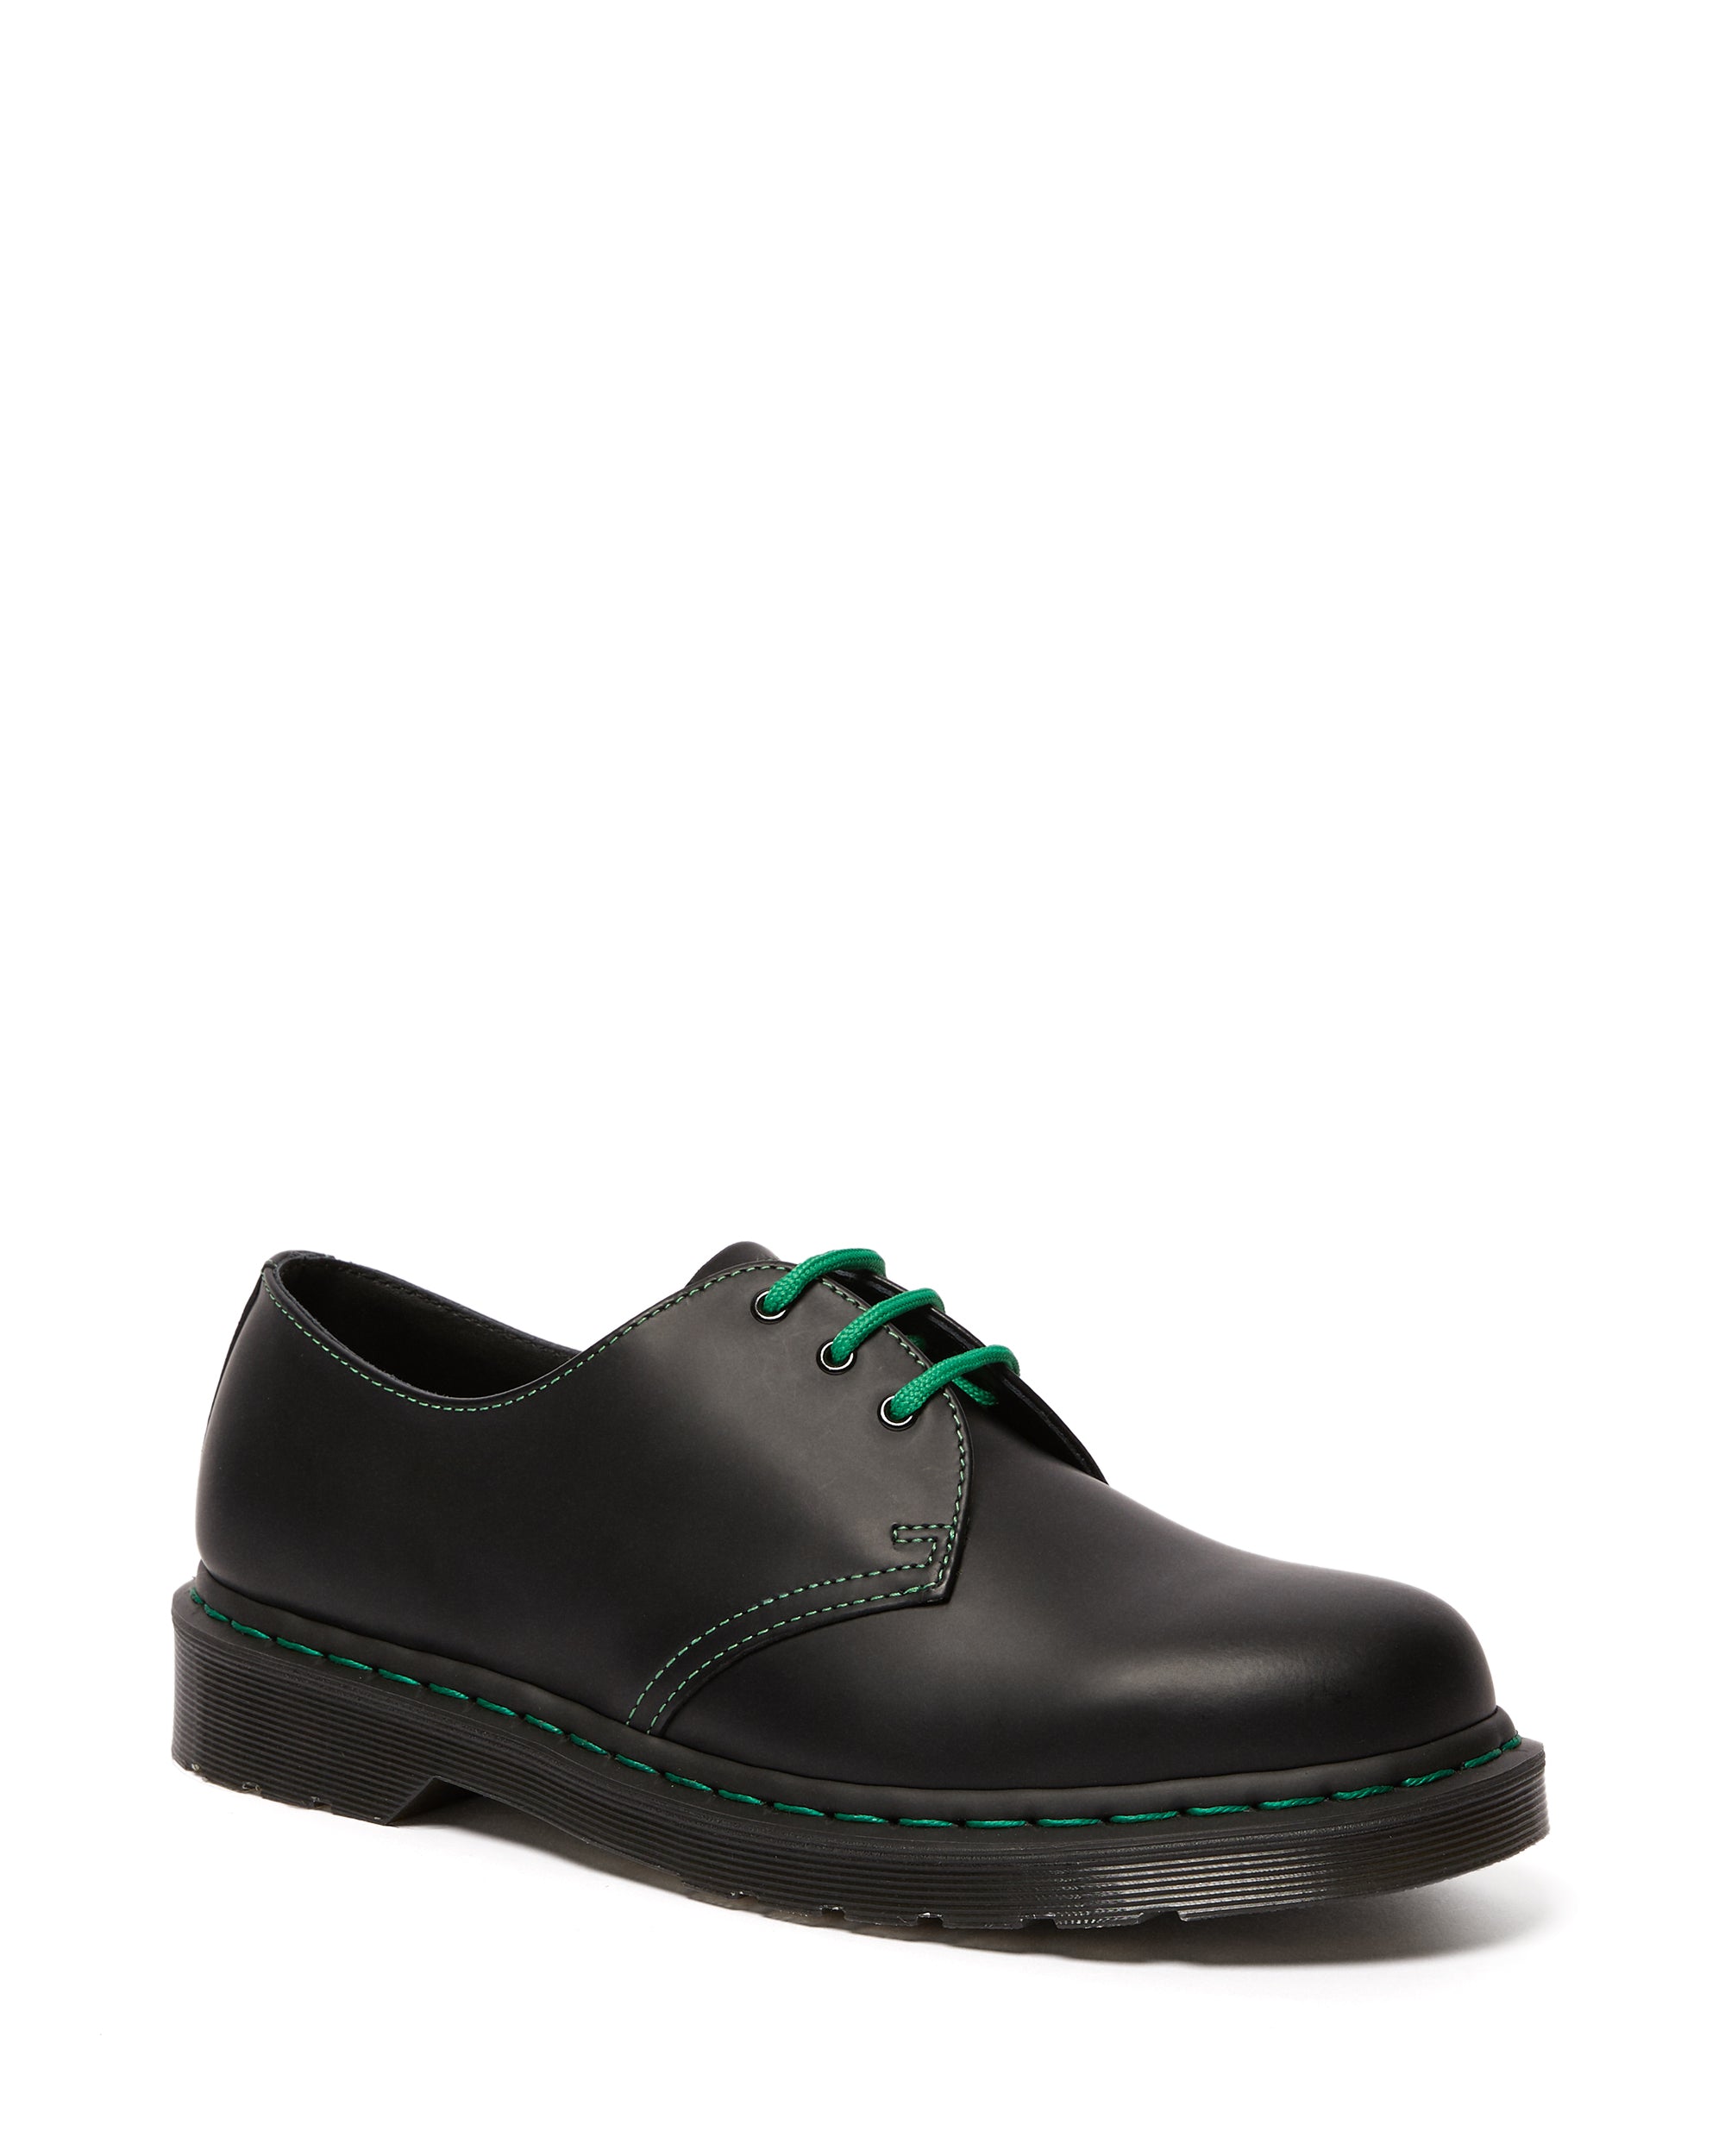 1461 GS BLACK SMOOTH OXFORD – Posers Hollywood